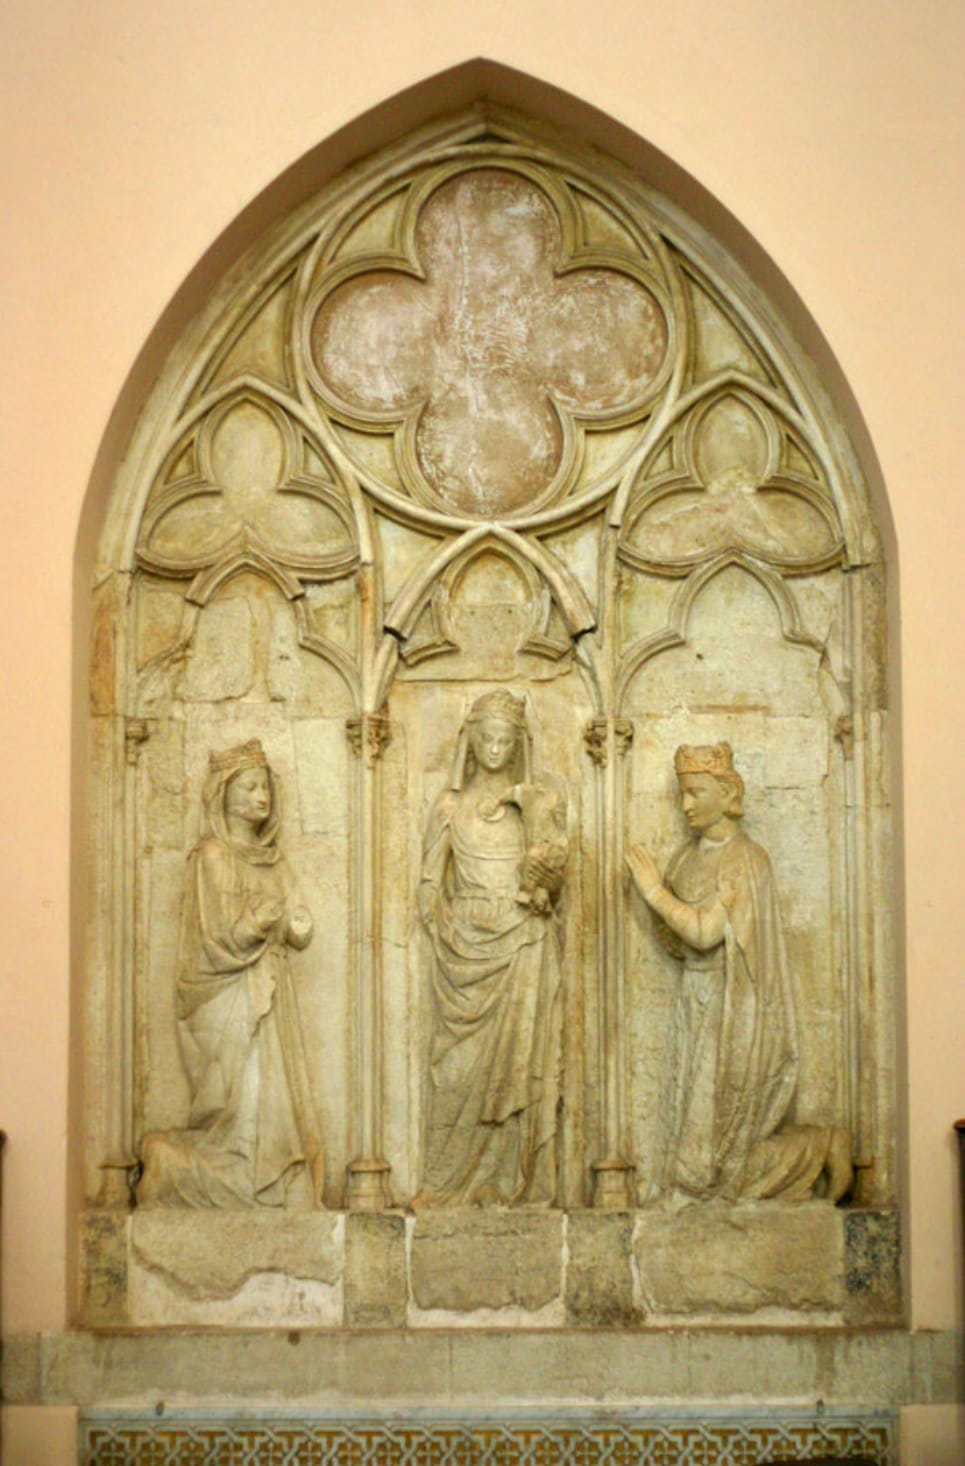 Tombe d'Isabelle d'Aragon, 1271, cathedrale de Cosenza